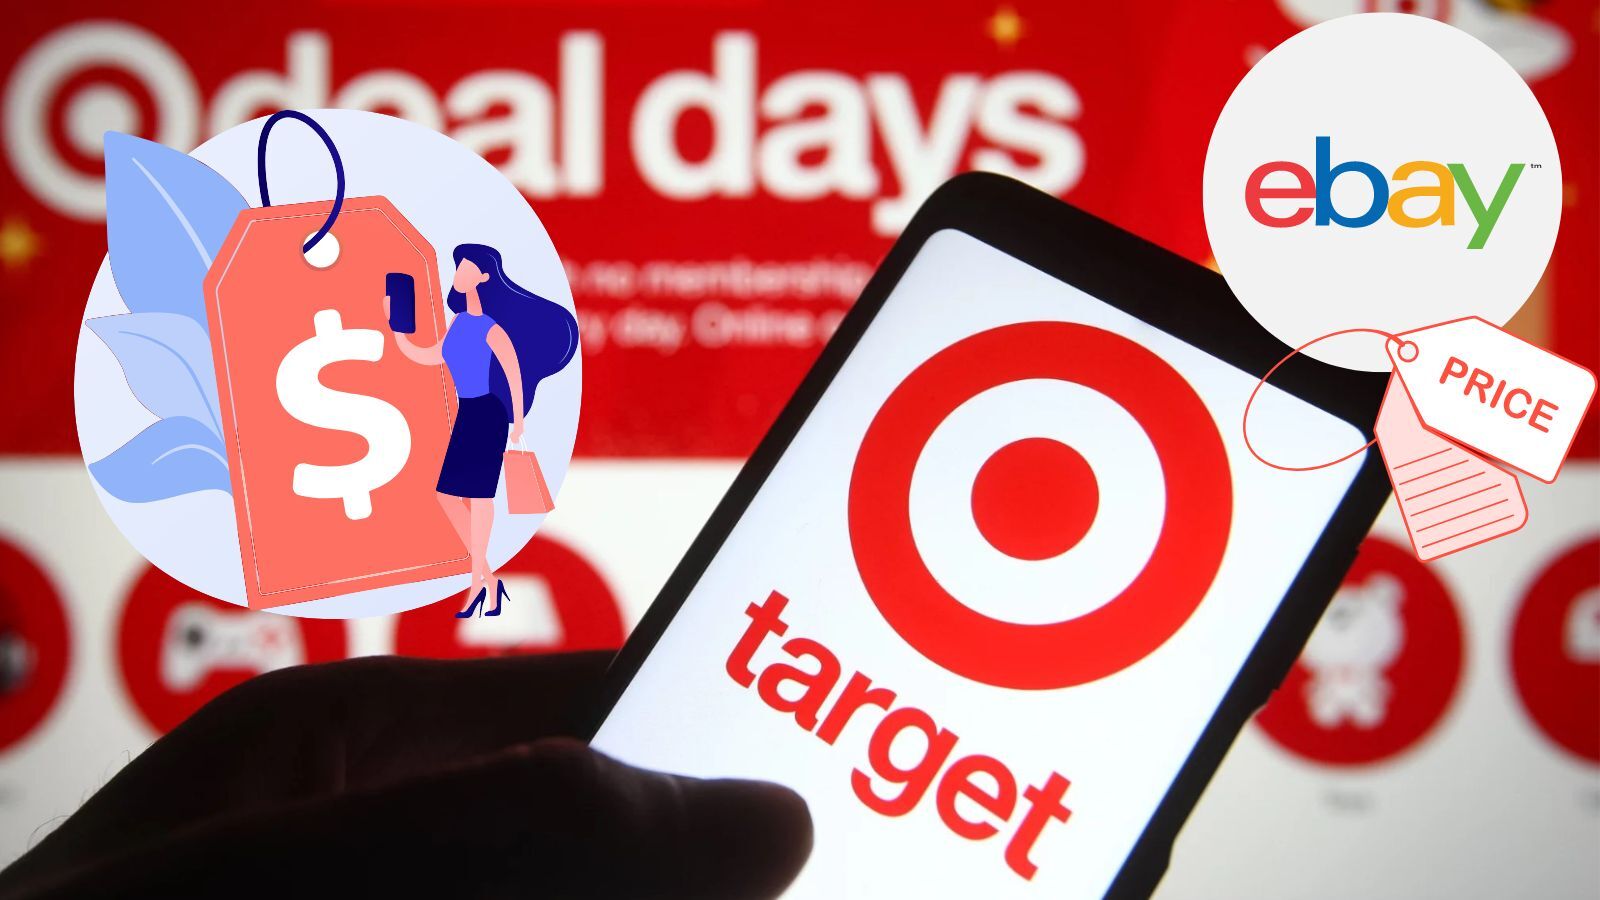 Does Target Price Match eBay? (Some Interesting Facts)